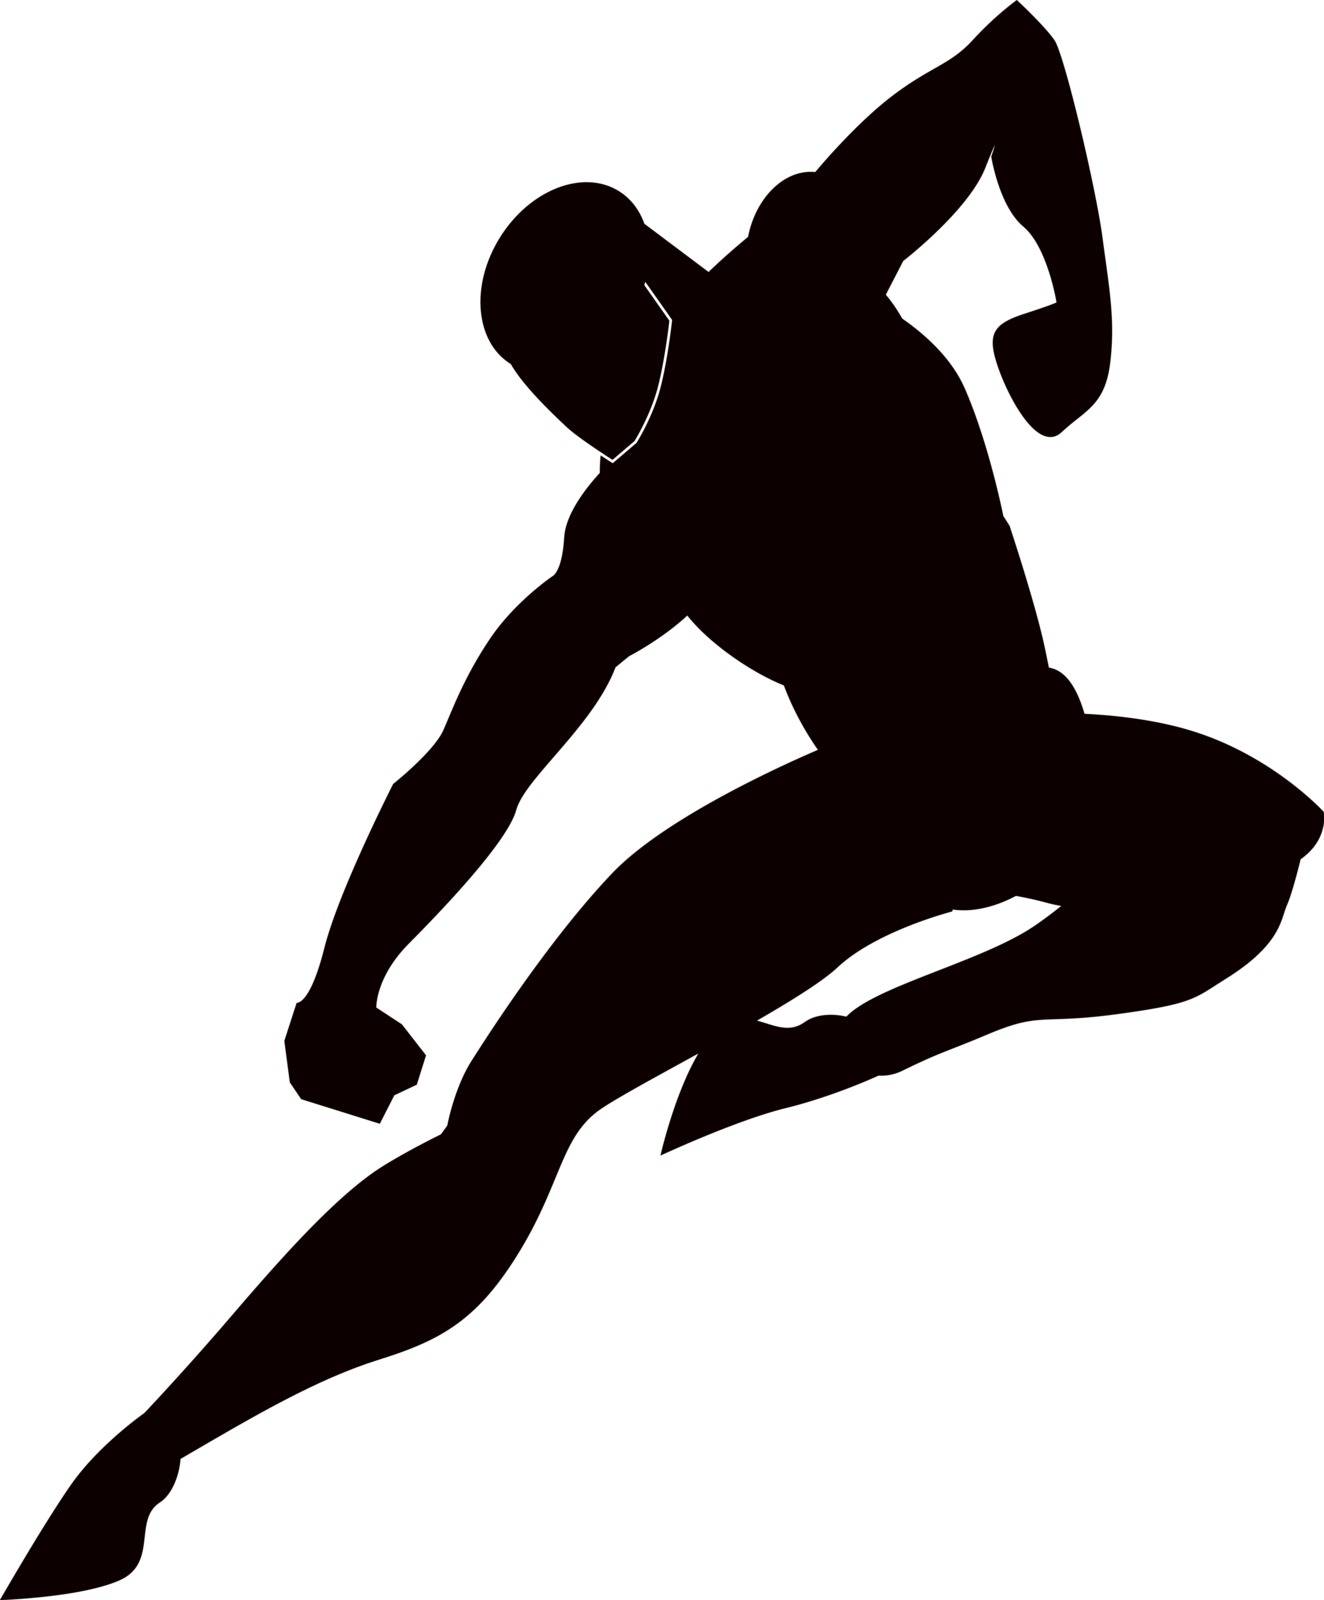 Martial Arts, Black Silhouette of a Man, Punching and Kicking, vector illustration